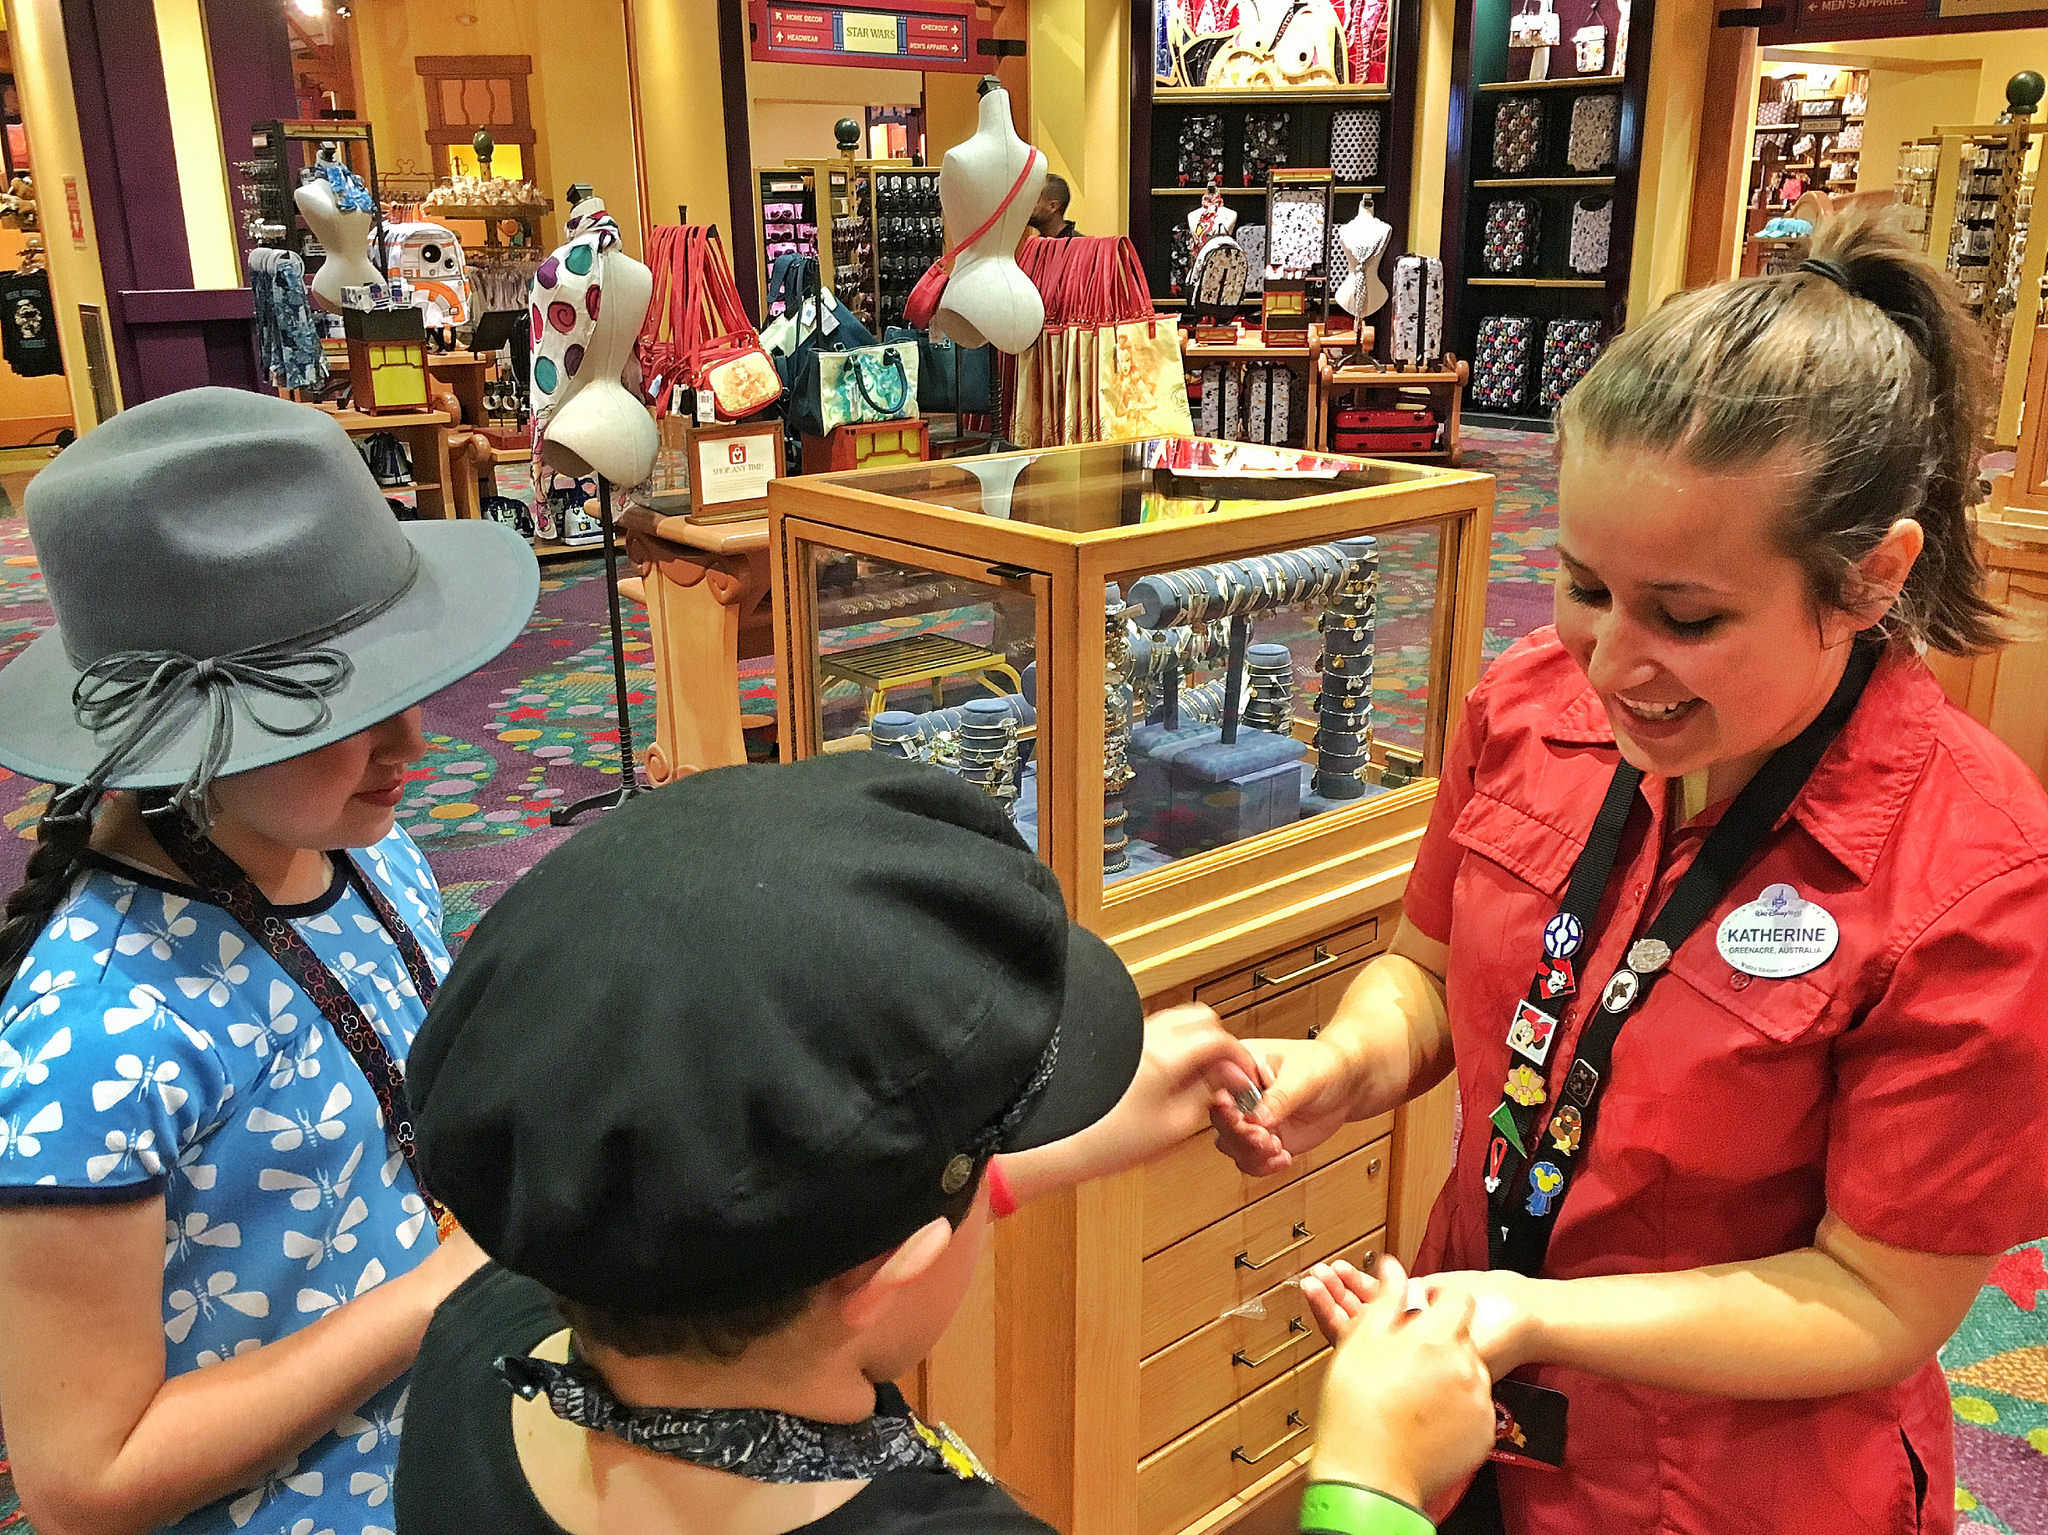 How to Trade Pins at Walt Disney World Your Complete Guide